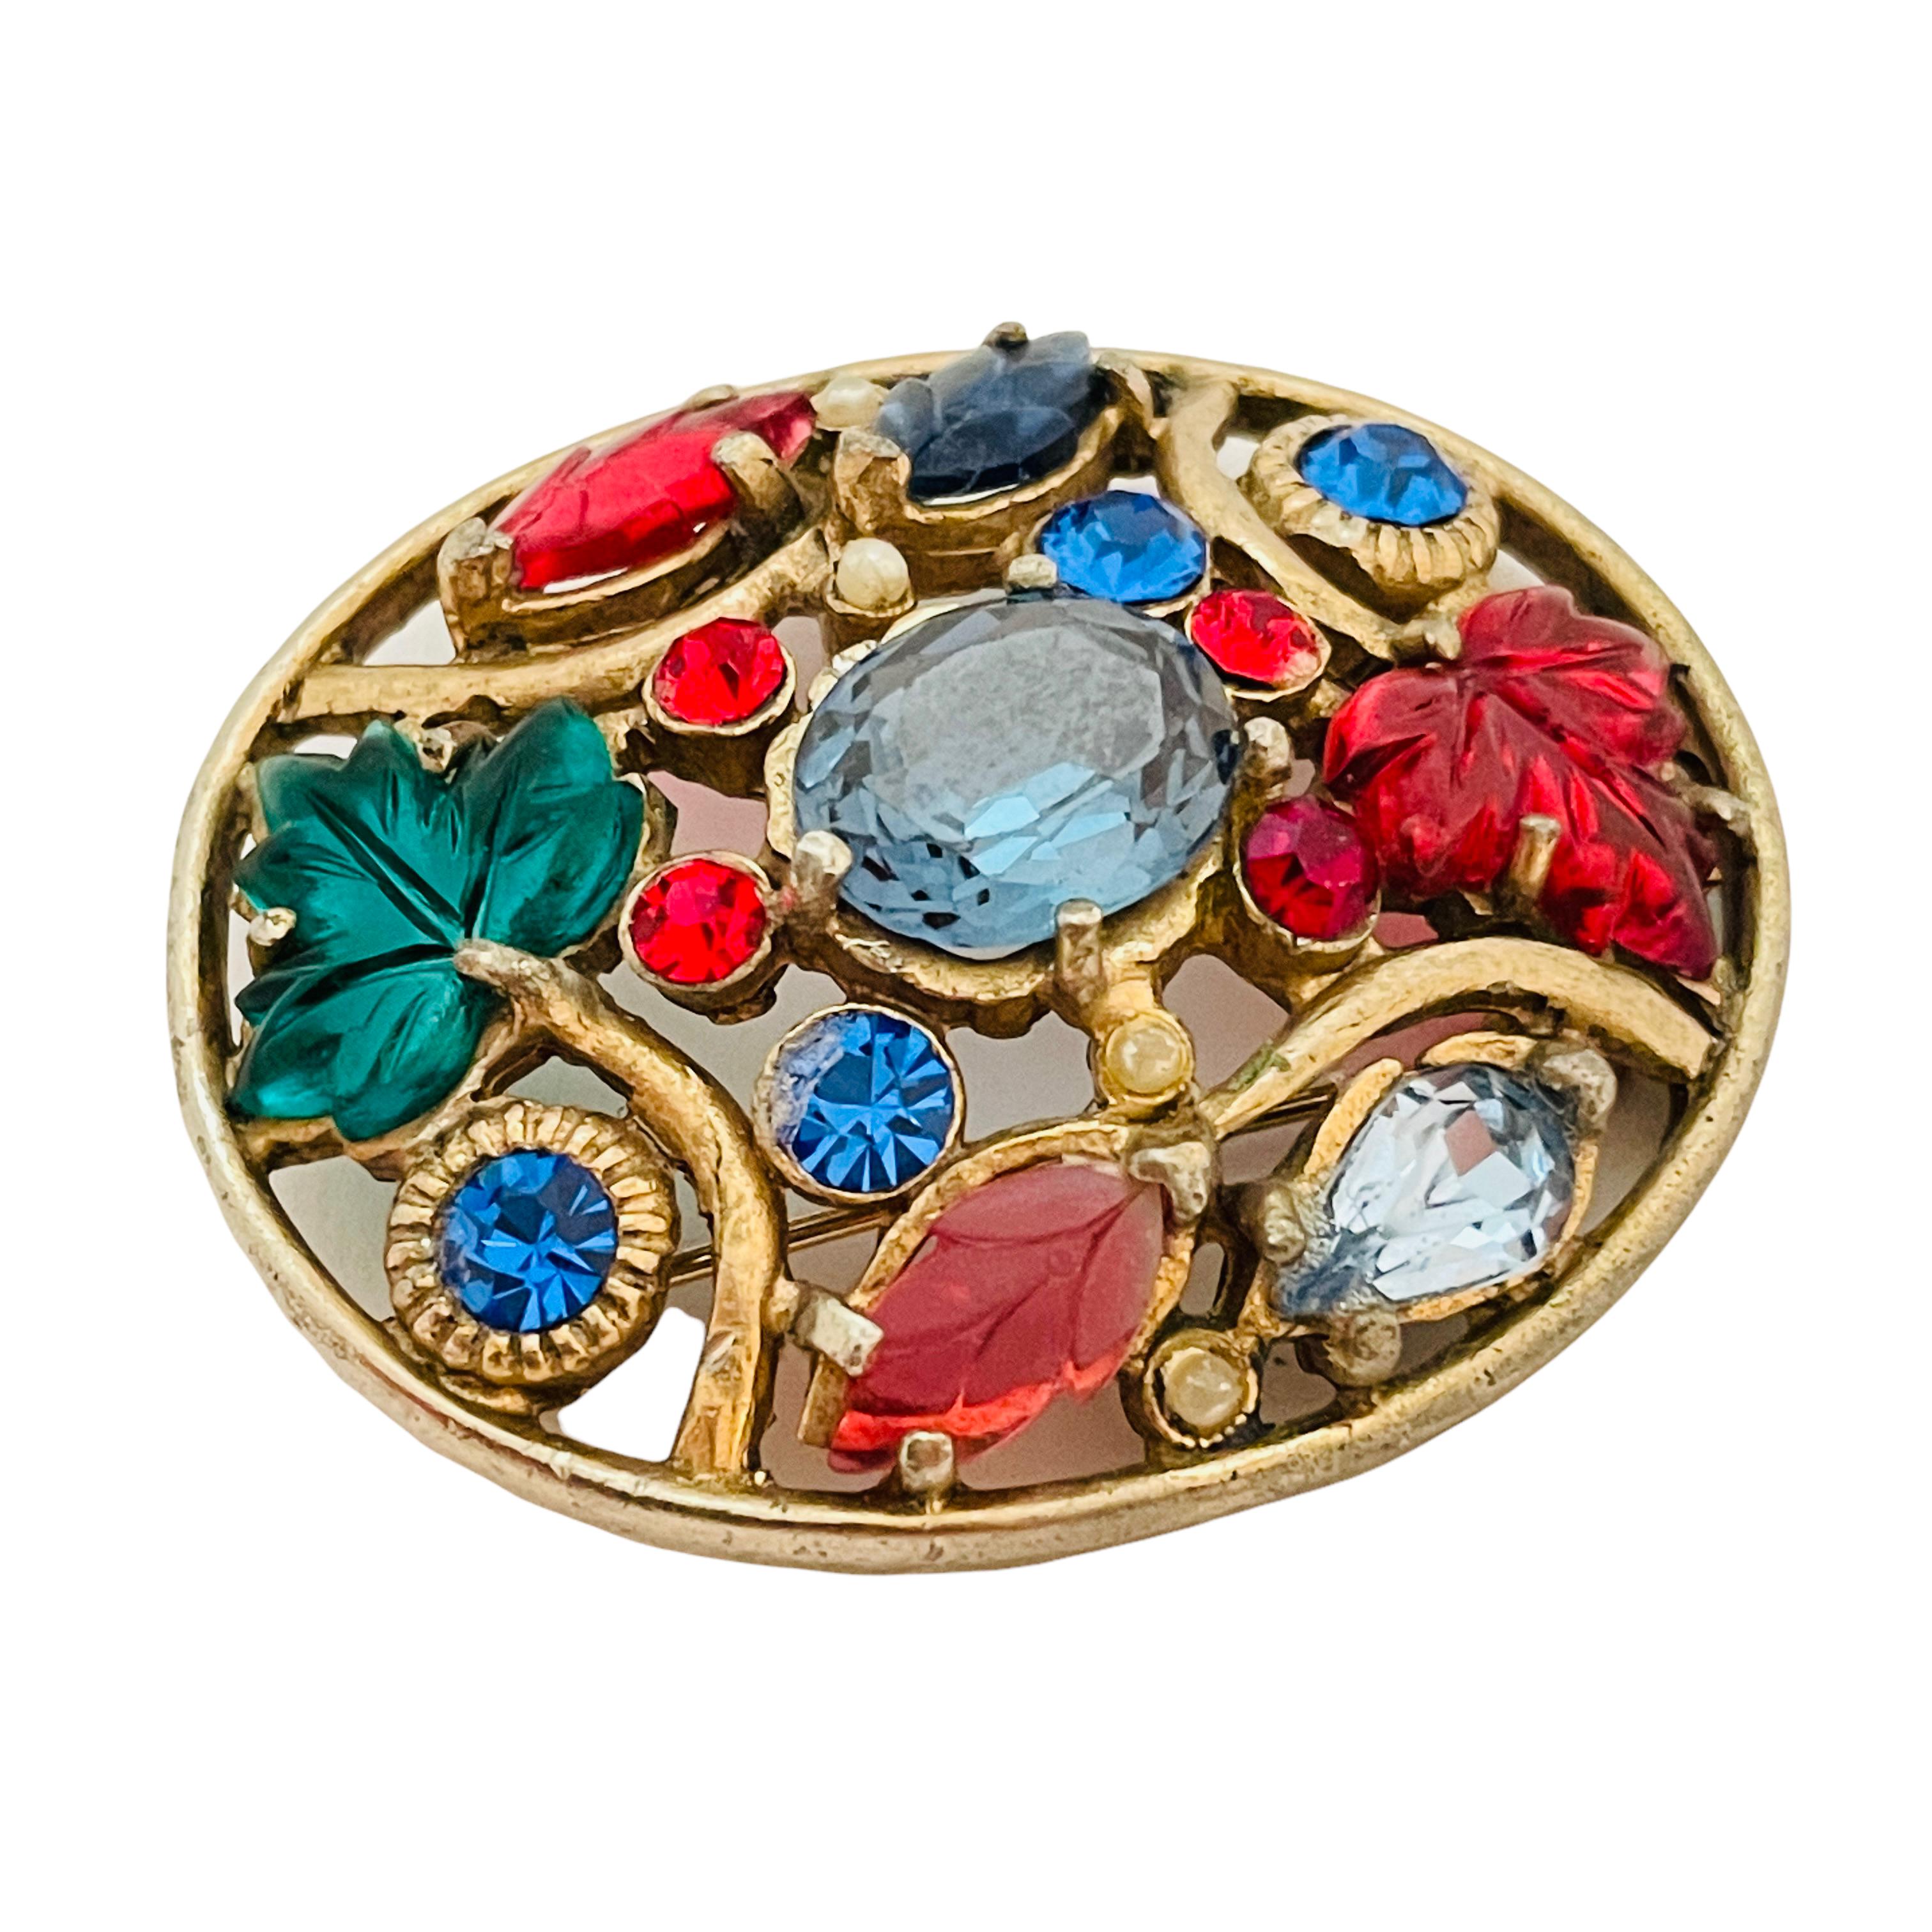 Vintage house of SCHRAGER FIFTH AVENUE gold glass designer runway brooch In Good Condition For Sale In Palos Hills, IL